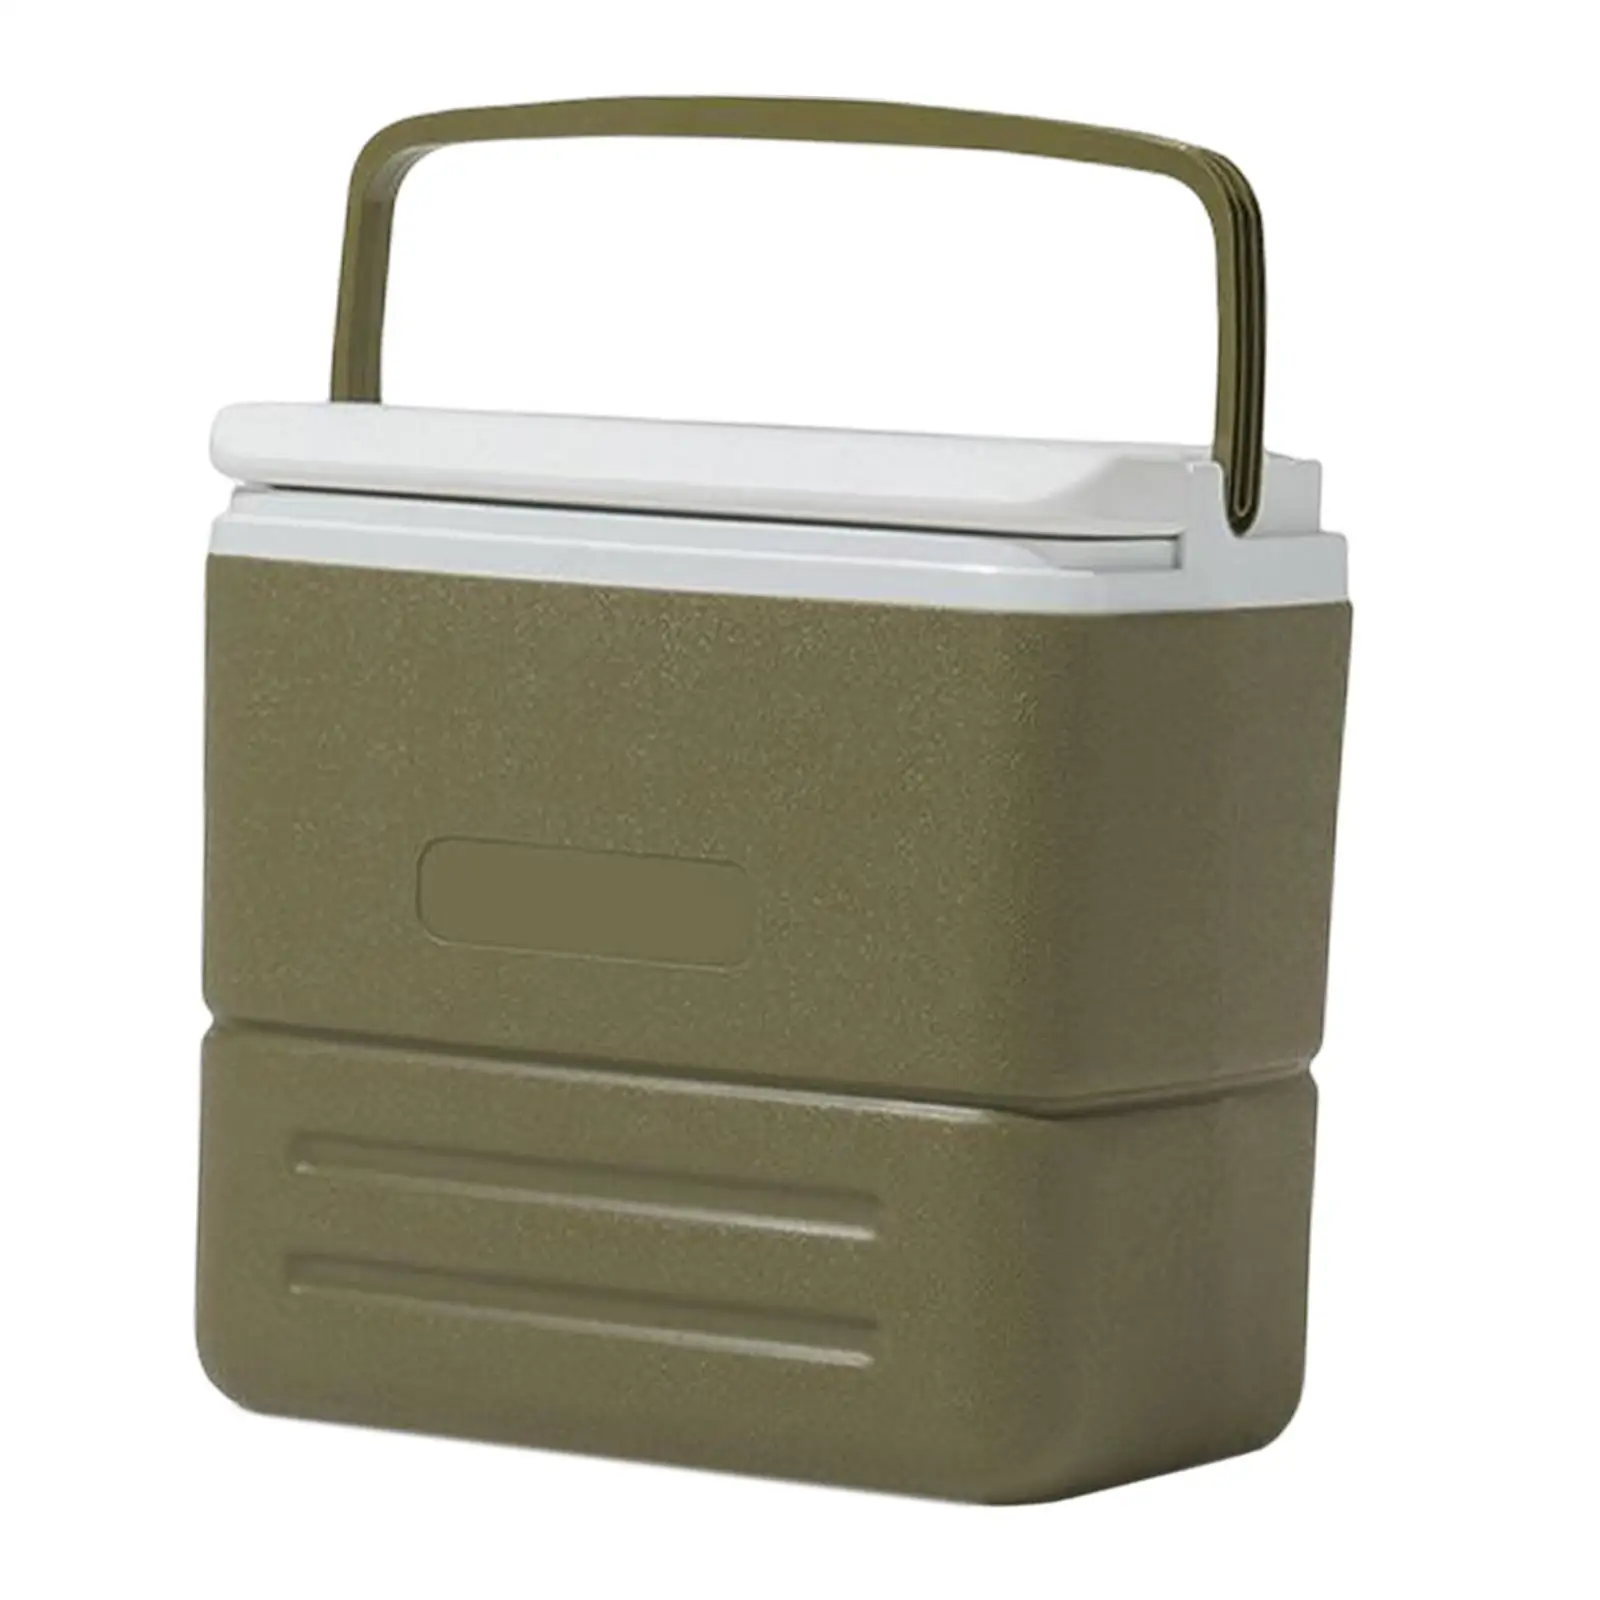 Portable Insulated Thermal Food Warm Storage Food Delivery Cooler Bag Lunch Box for BBQ Car Transportation Boat